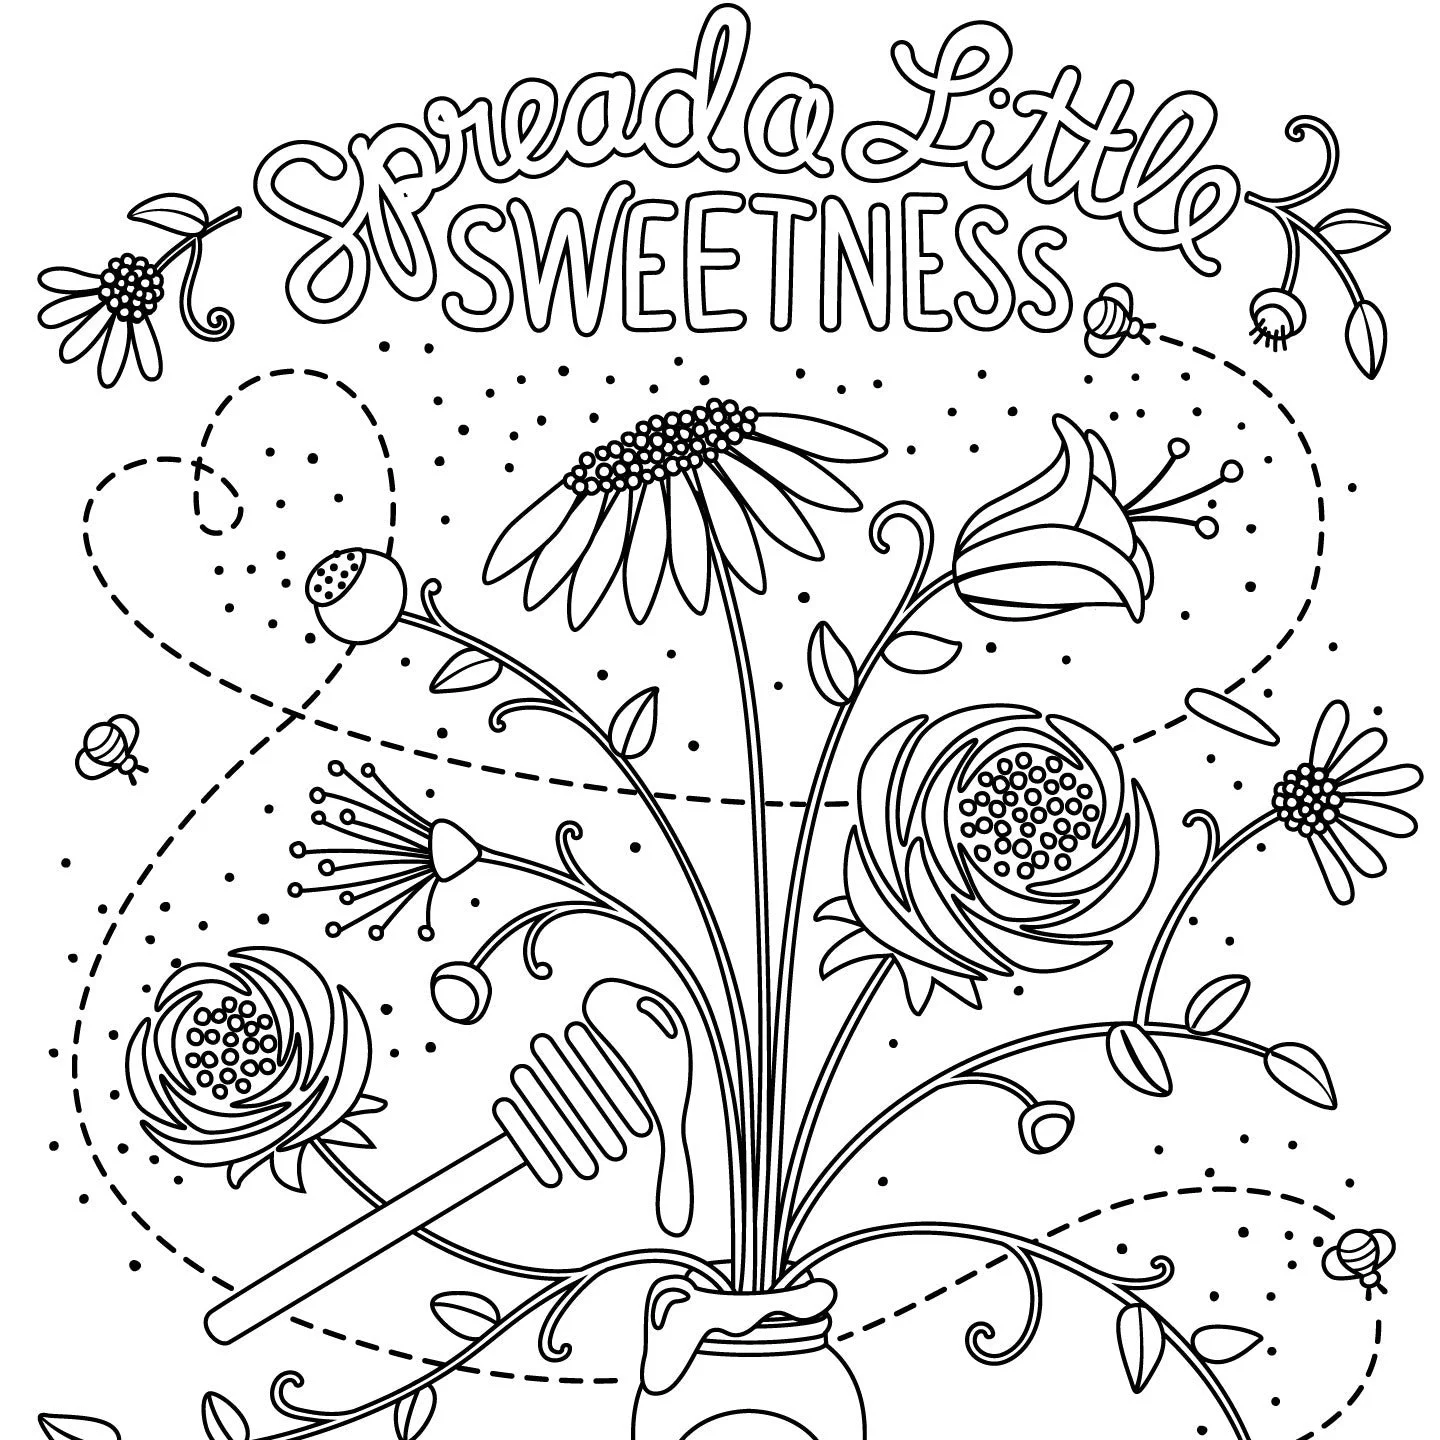 Sympathy Coloring Pages